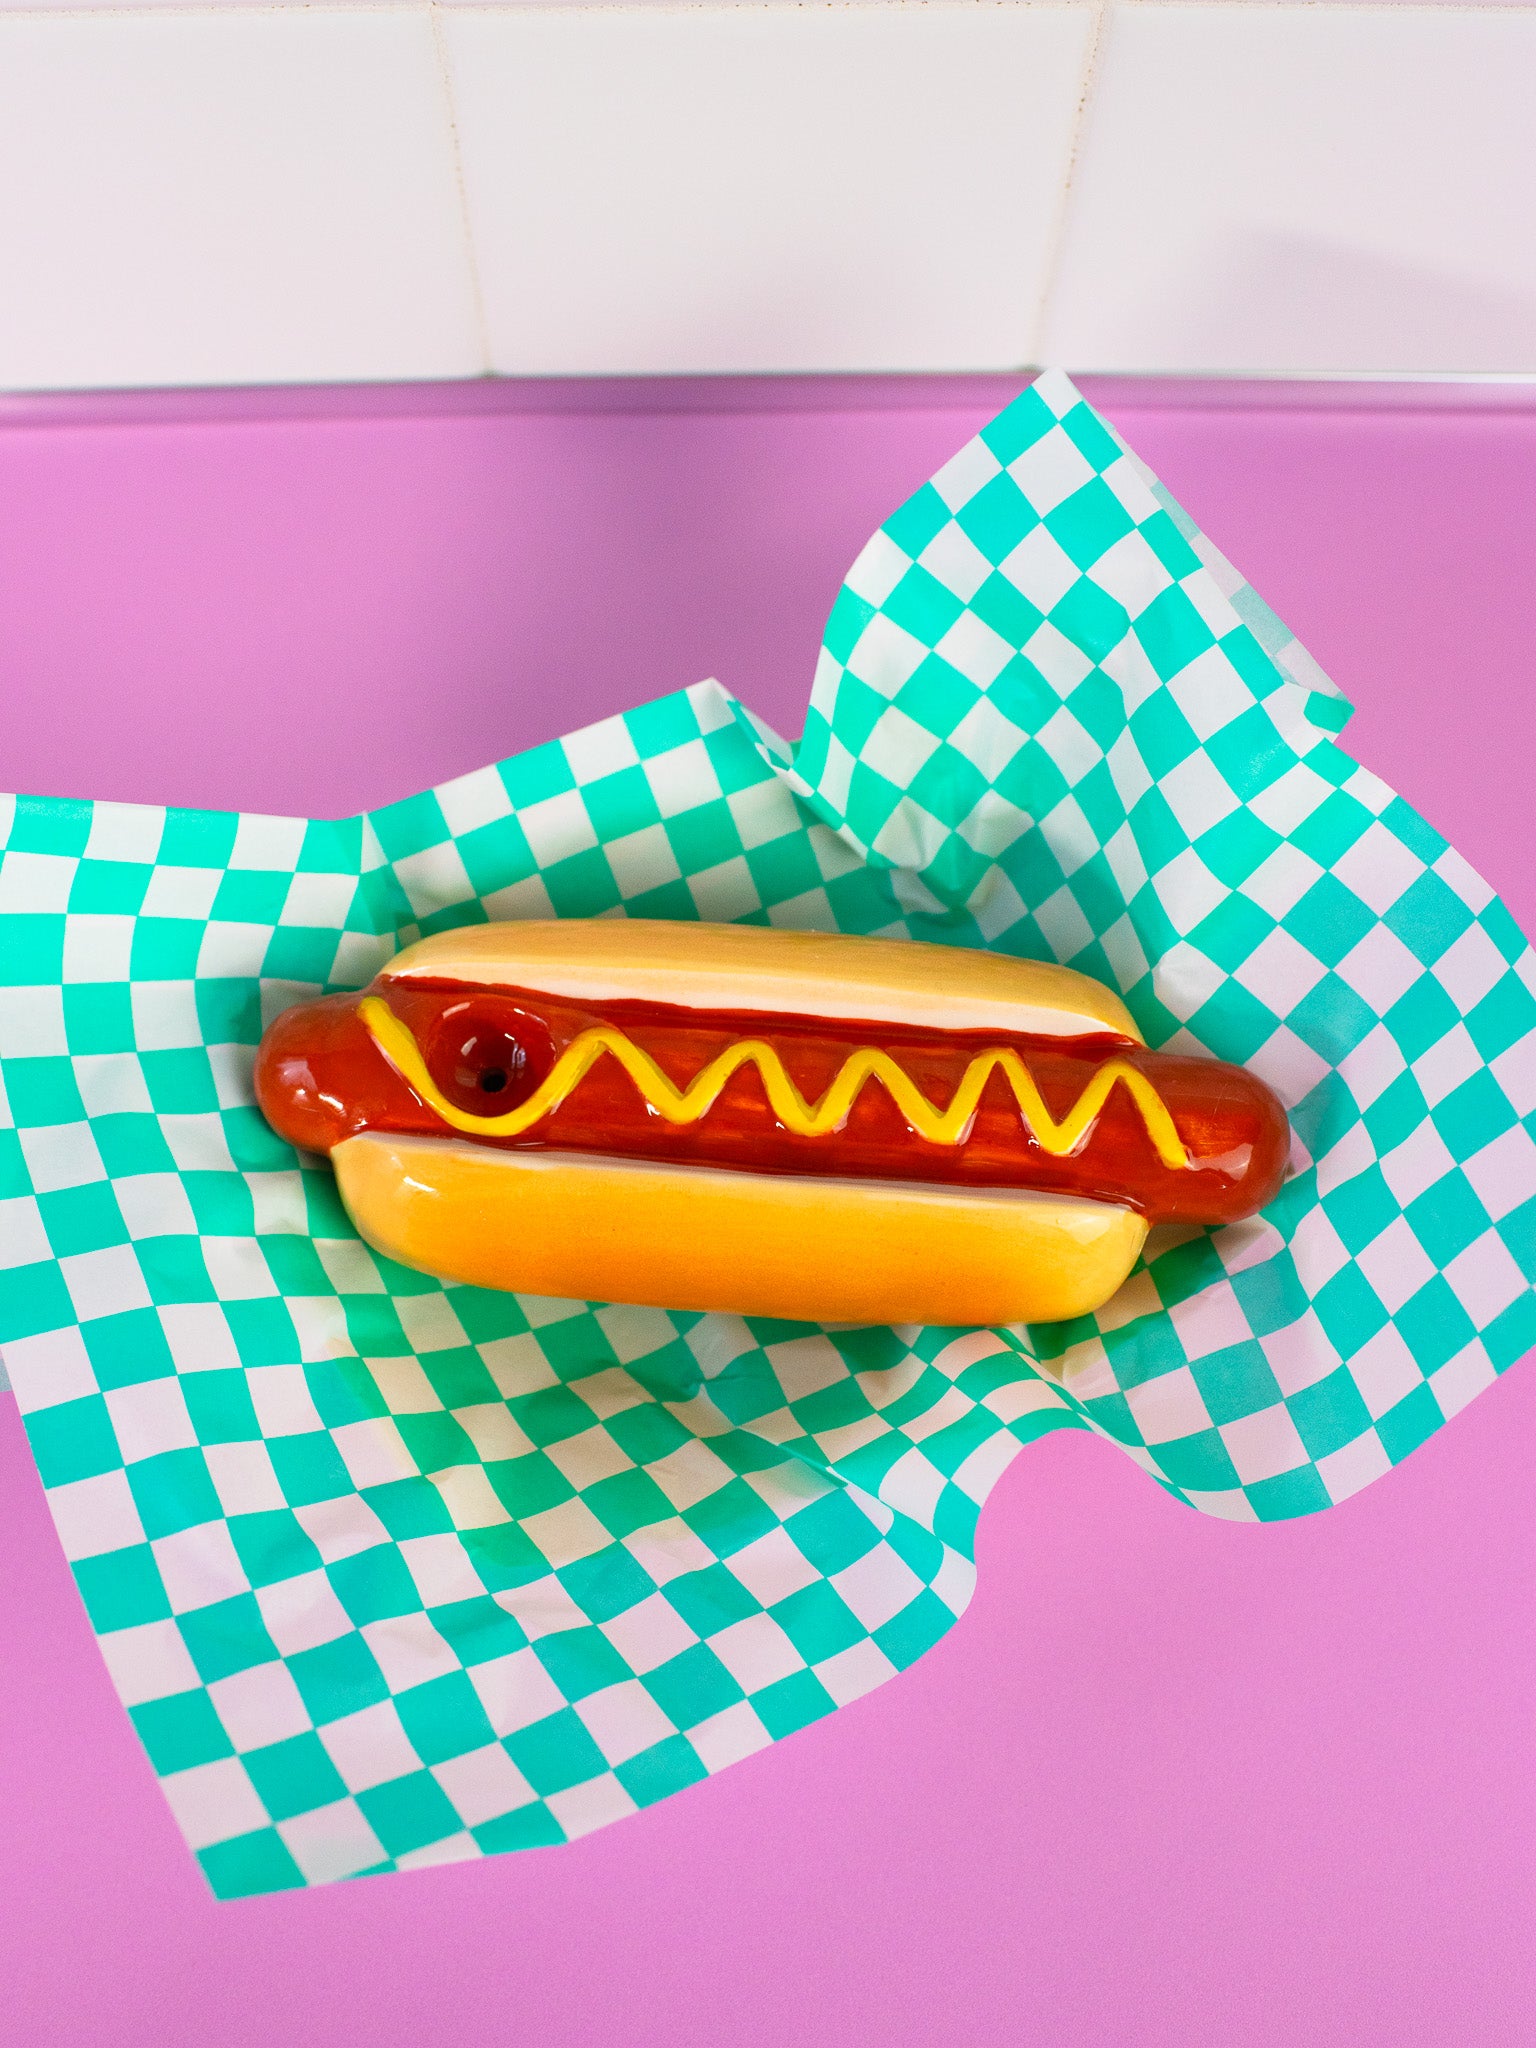 Hot dog pipe